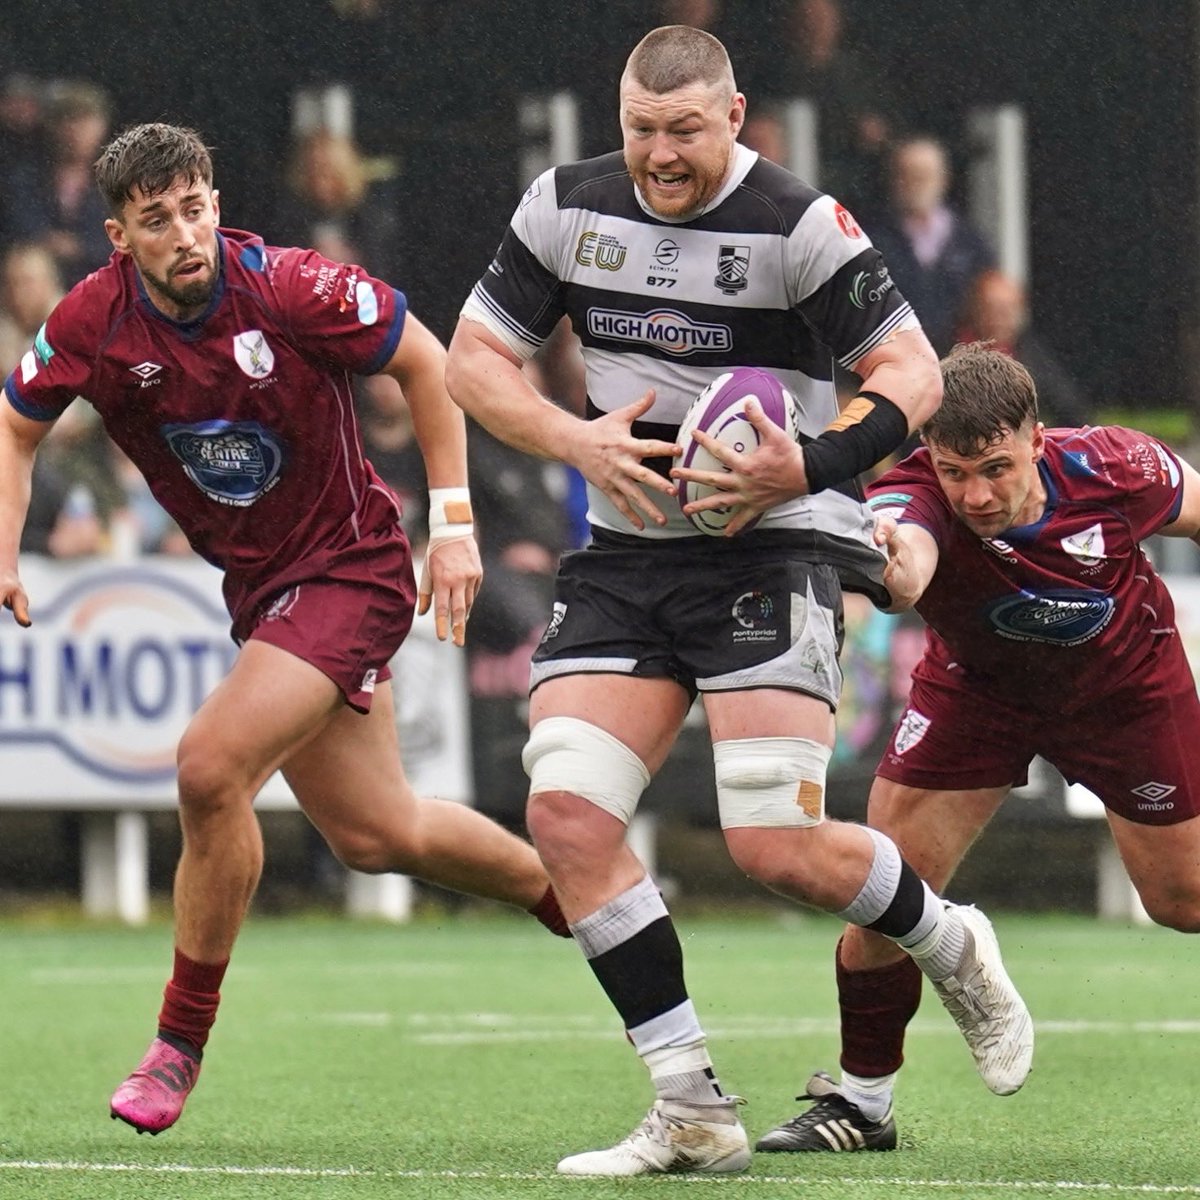 Another #captains performance from @Kparker1991 leading from the front and scoring during @PontypriddRFC v @SwanseaRFC in the @WelshRugbyUnion @IndigoPrem Sat 6 May2023 #weareponty #olé #pontypridd #rugby #rugbyplayer #welshrugby #valleys #valleysrugby #leadingfromthefront